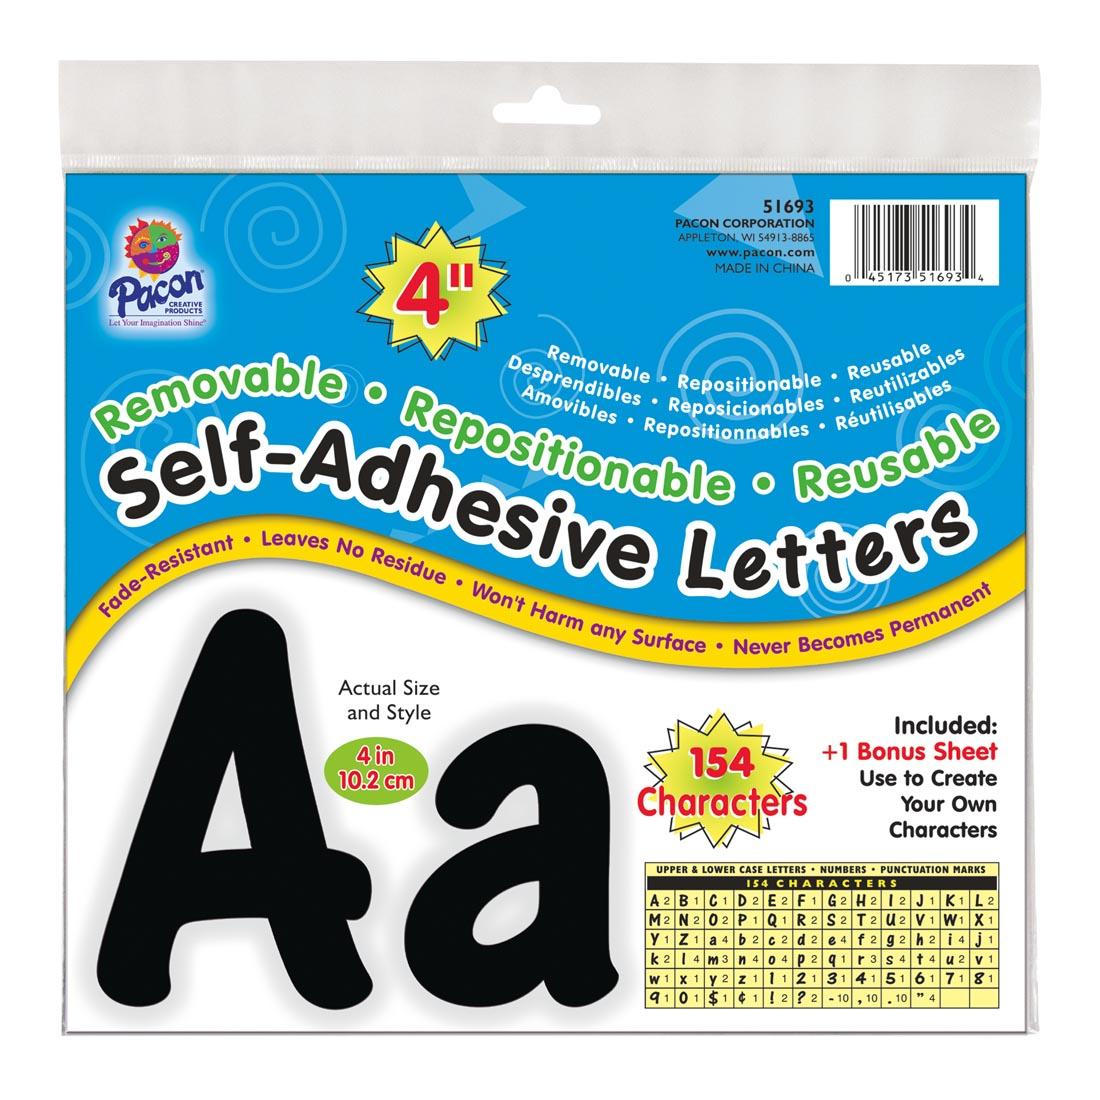 Pacon Reusable Self-Adhesive Vinyl Letters & Numbers Cheery Font 4"Black